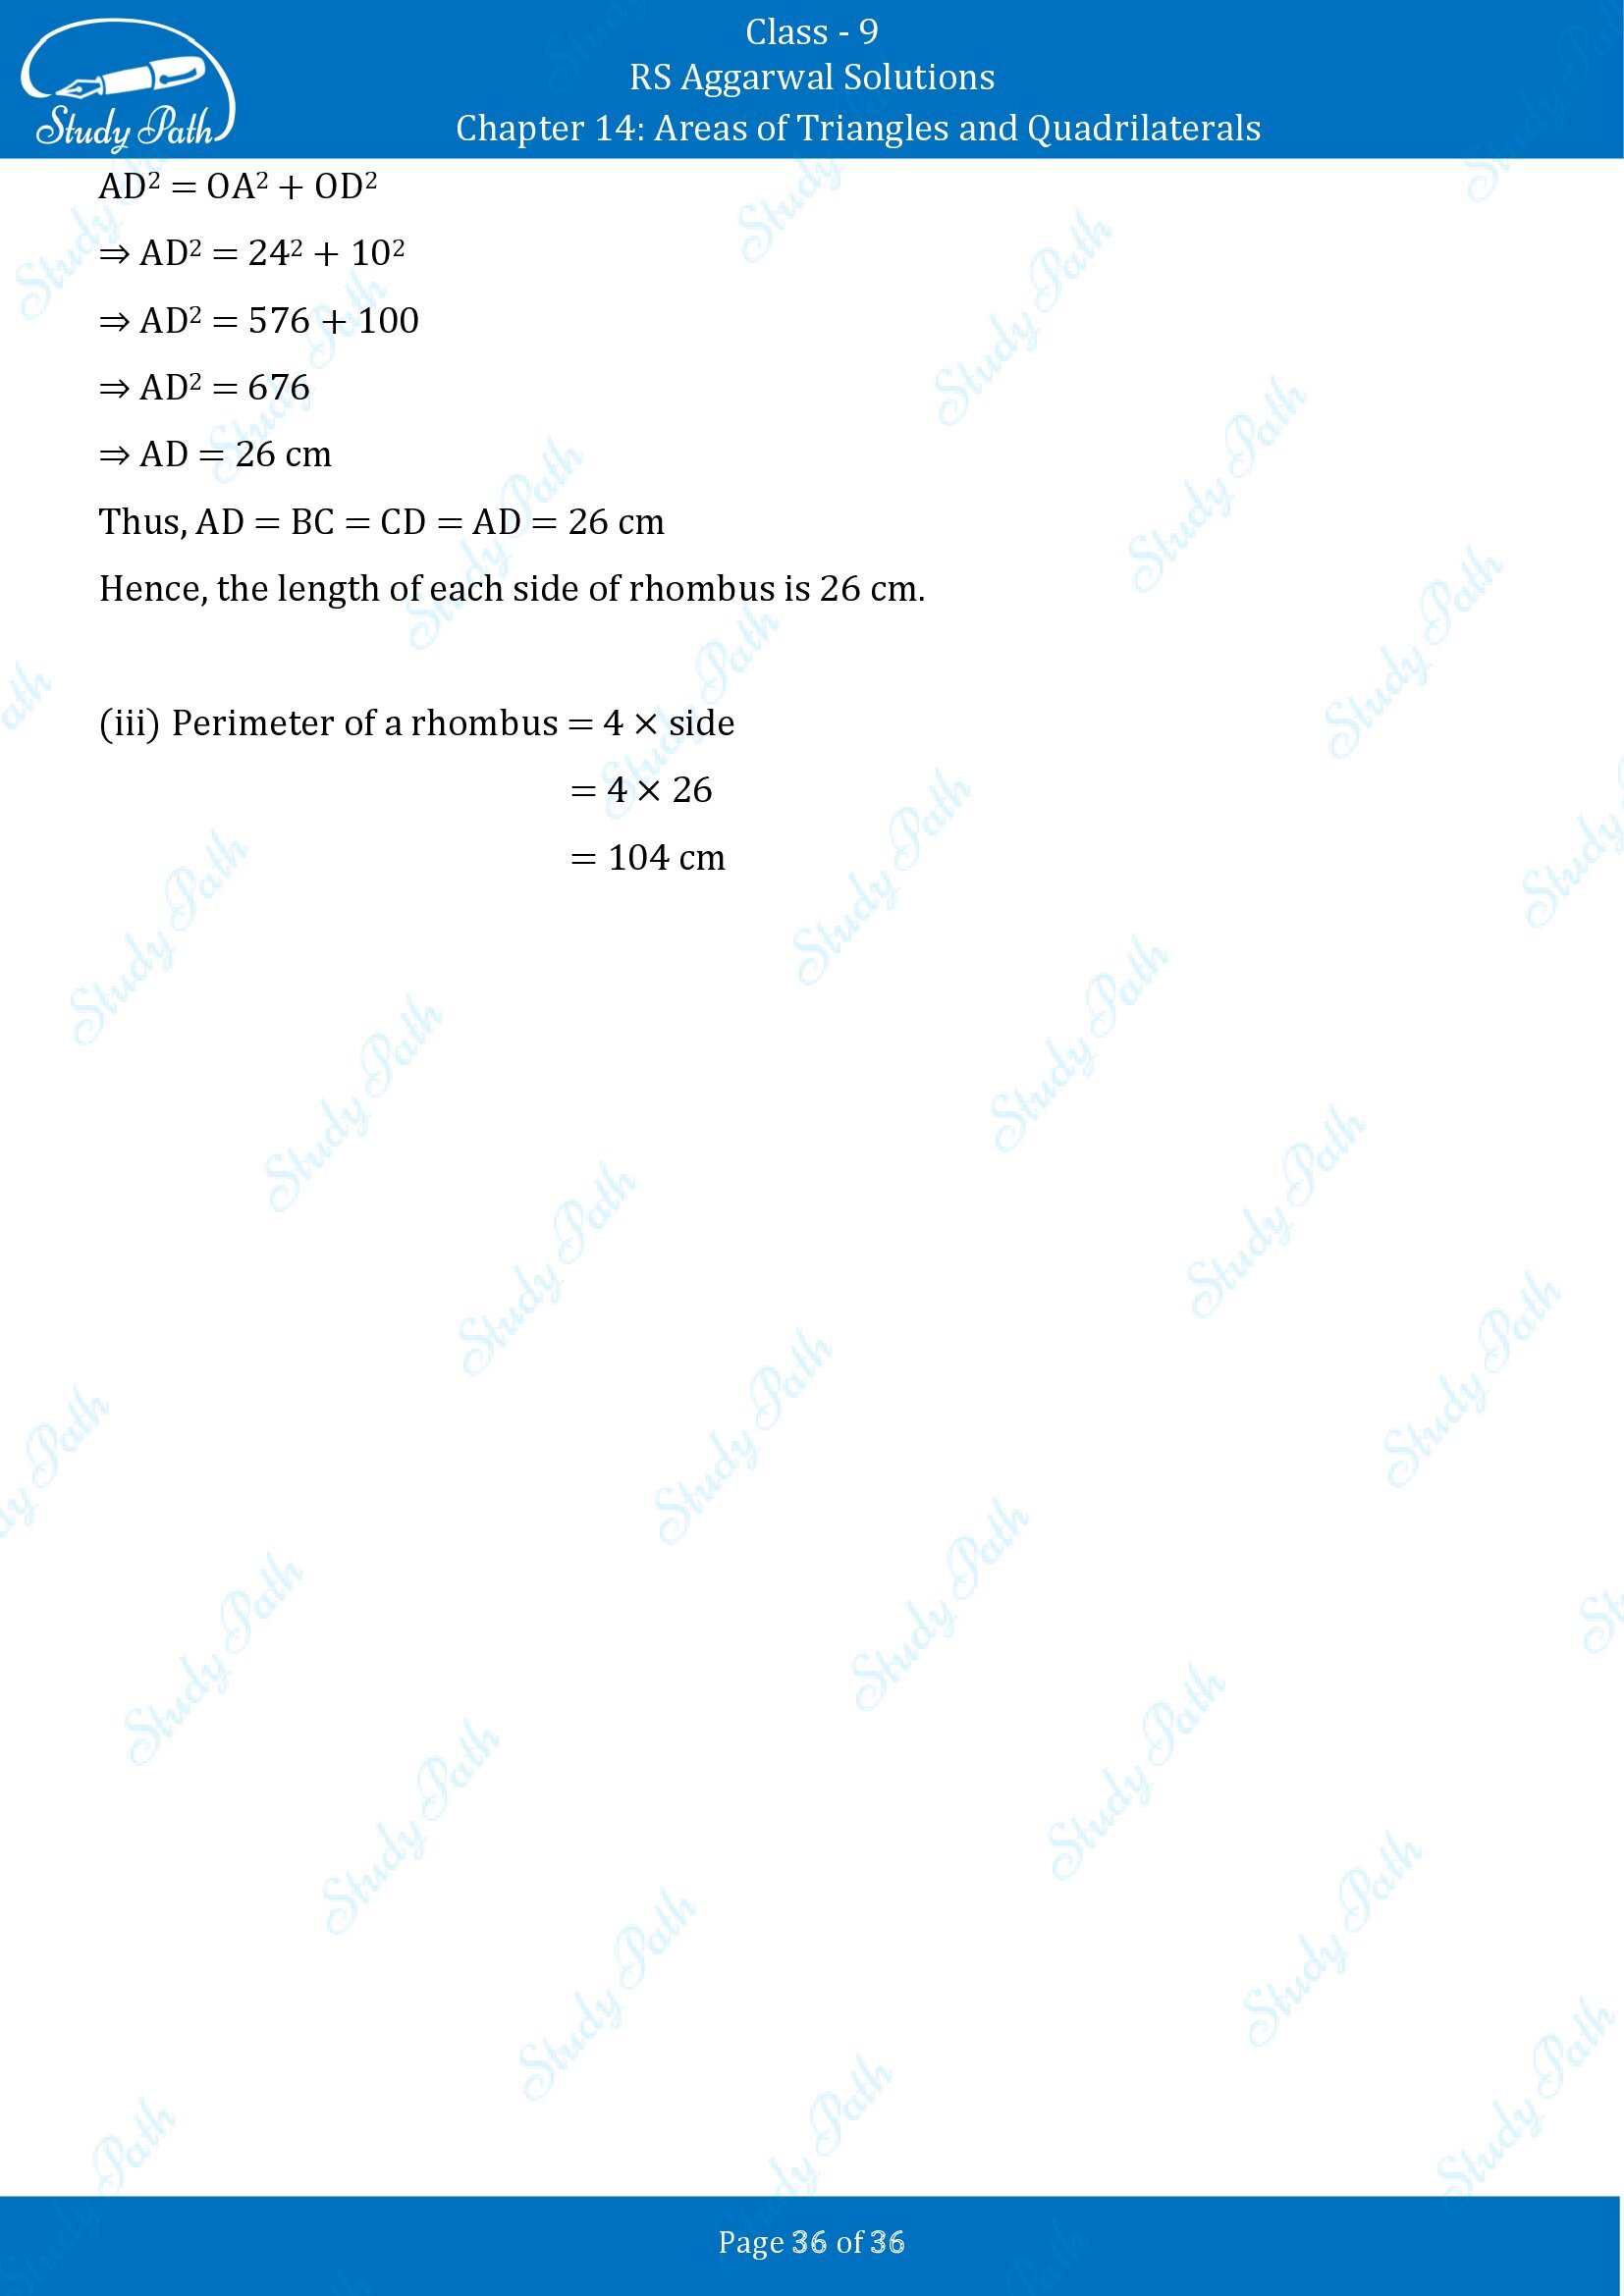 RS Aggarwal Solutions Class 9 Chapter 14 Areas of Triangles and Quadrilaterals Exercise 14 00036